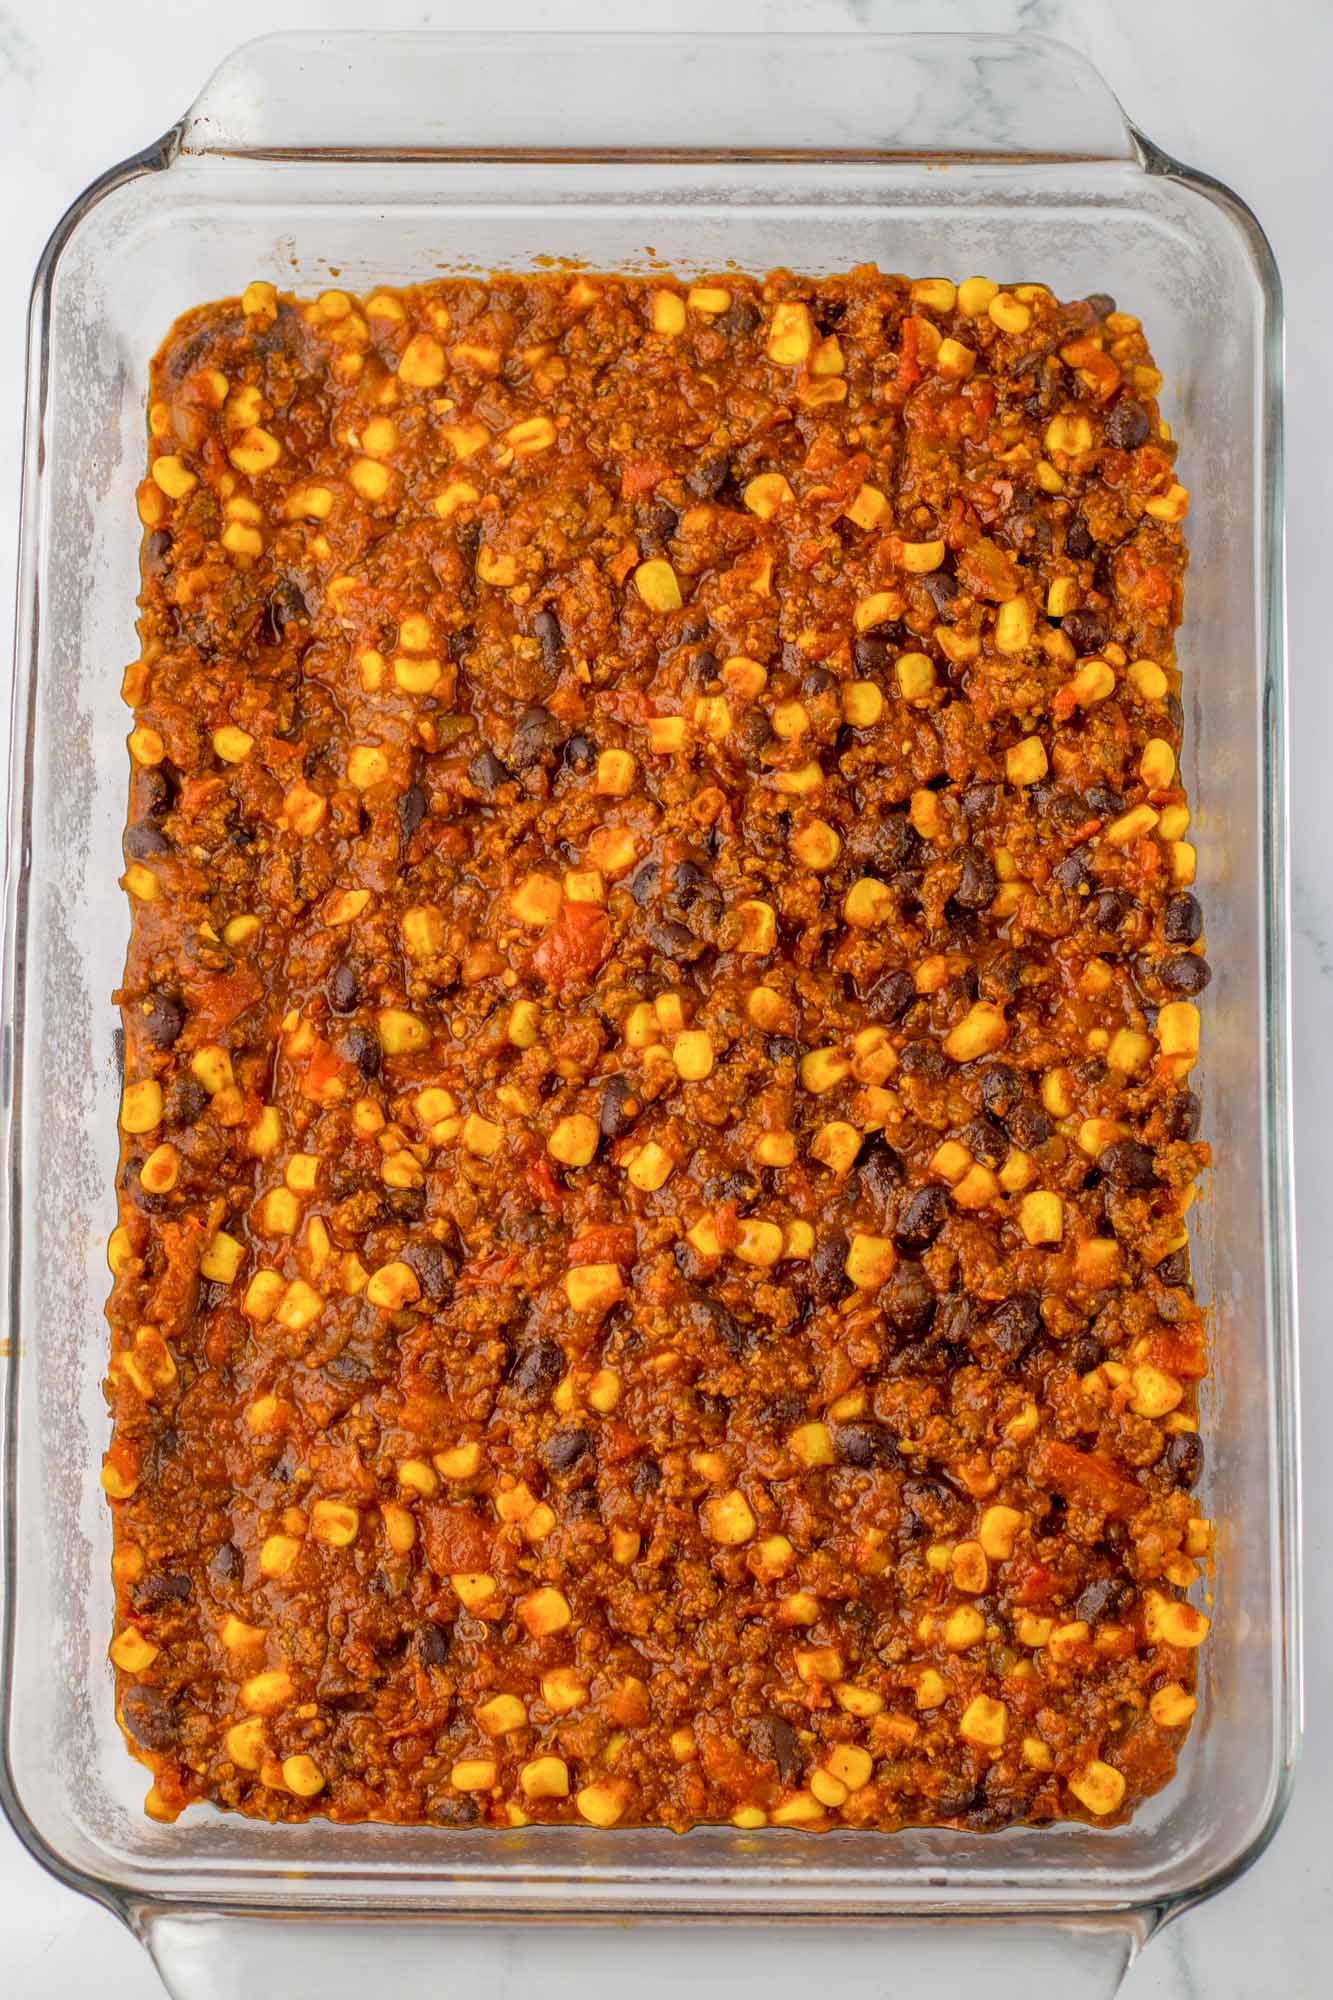 Chili mixture in a 9x13 inch pan, spreaded